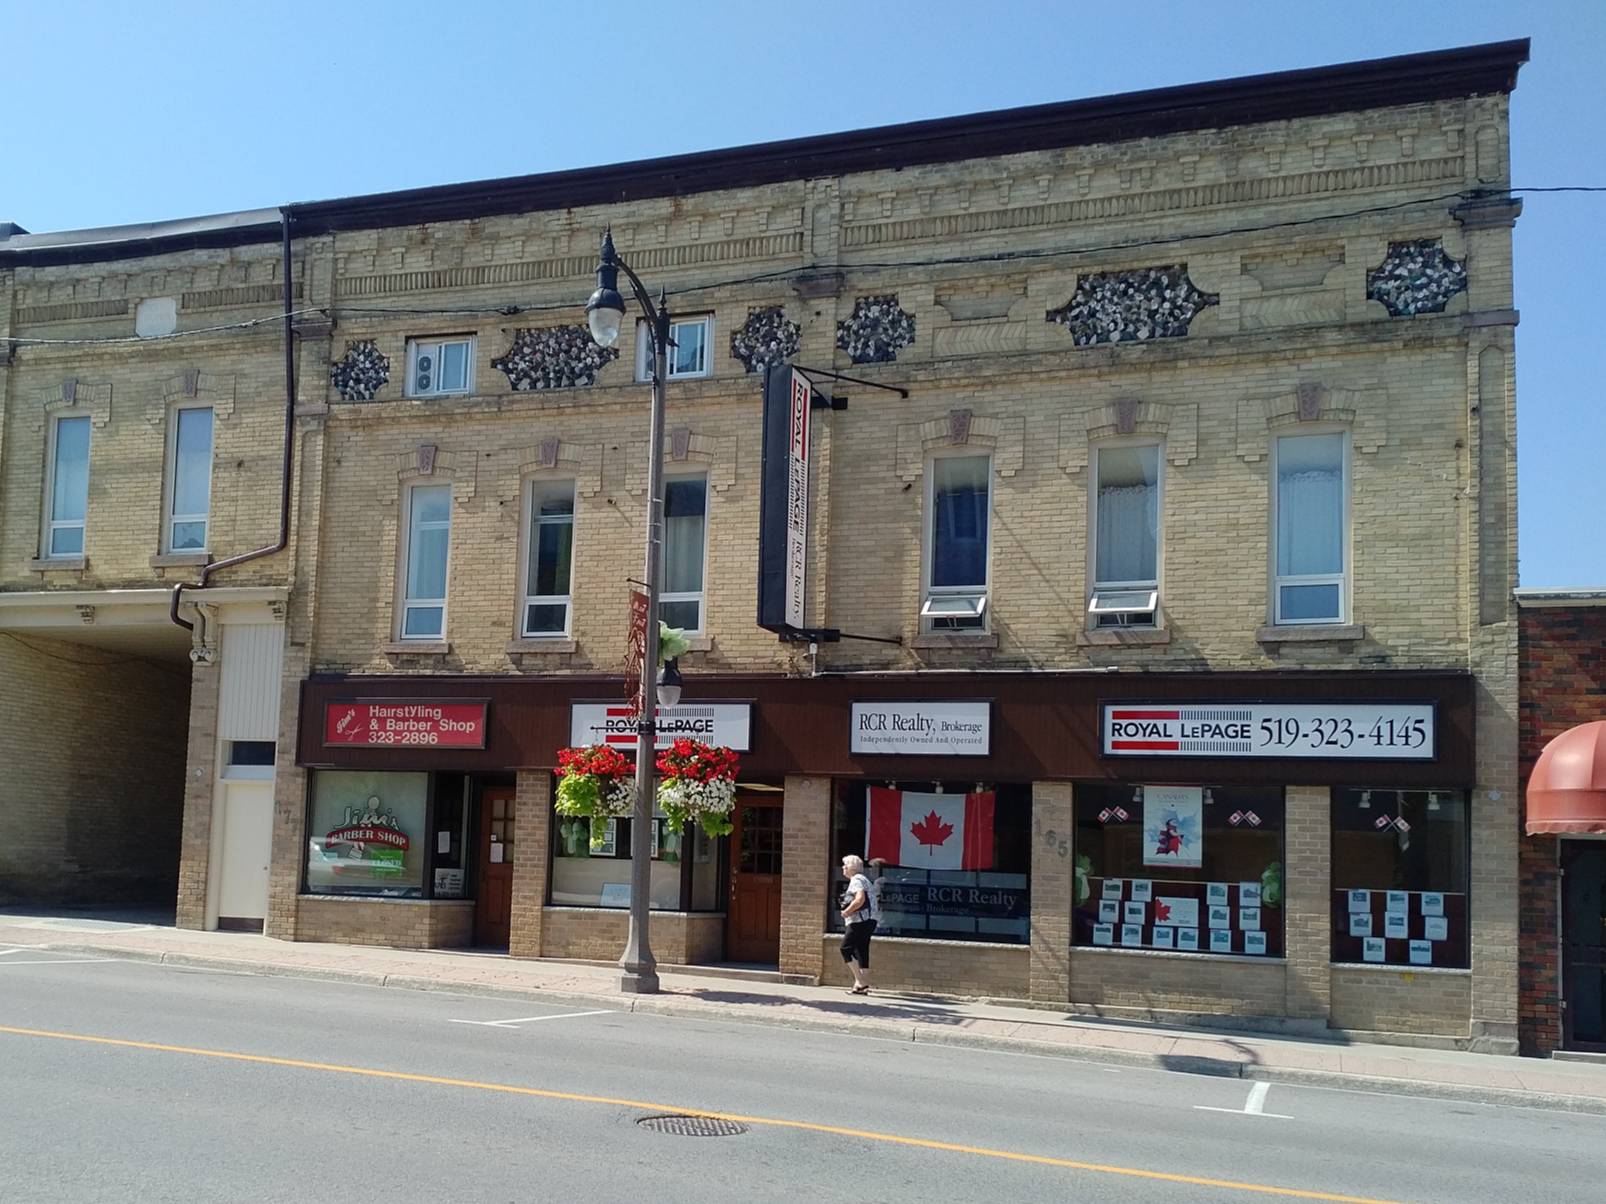 Royal LePage RCR Realty - 165 MAIN STREET SOUTH, Mount Forest, ON, N0G 2L0